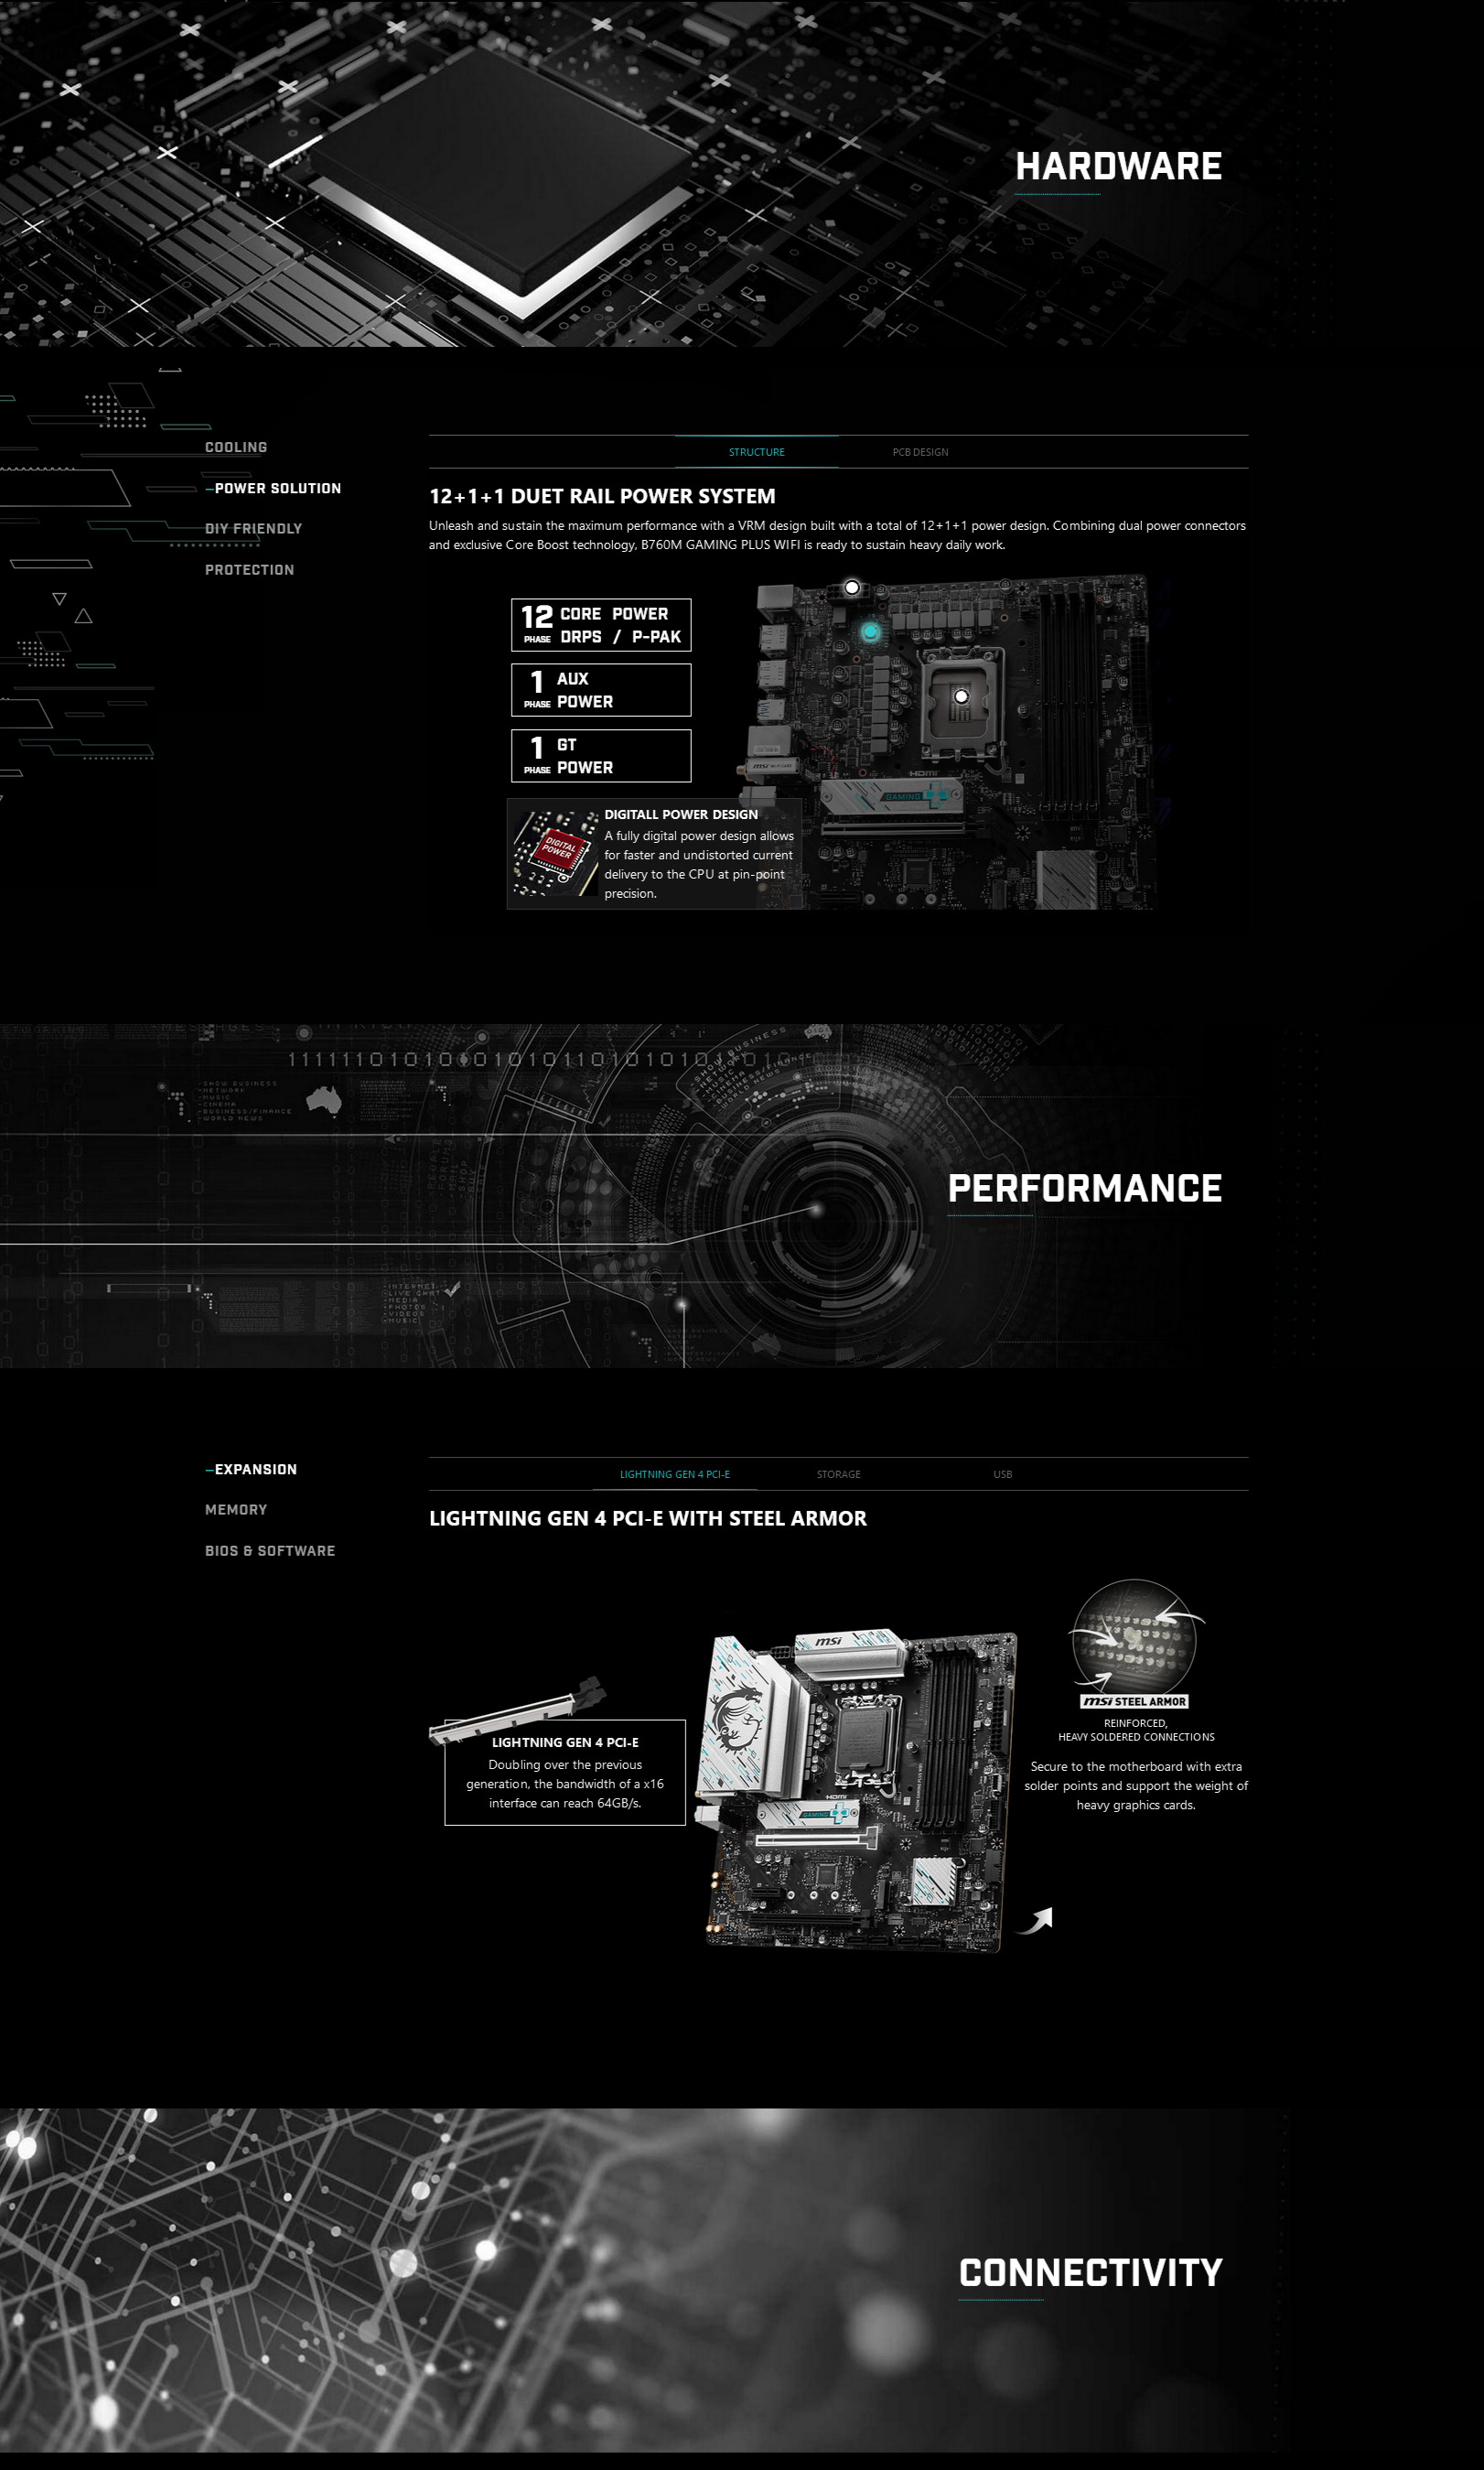 A large marketing image providing additional information about the product MSI B760M Gaming Plus WiFi LGA1700 mATX Desktop Motherboard - Additional alt info not provided